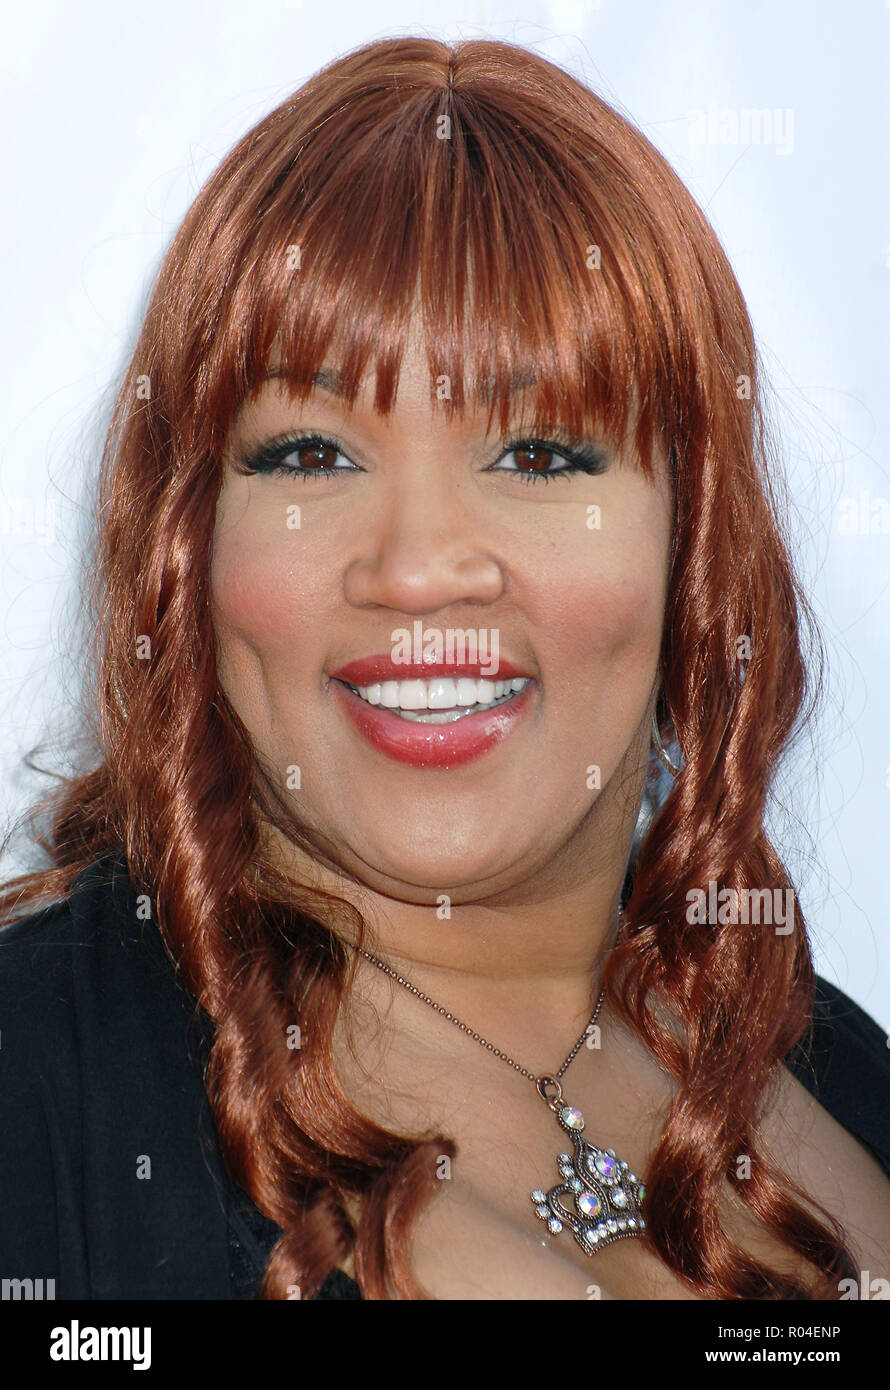 Kym Whitley arriving at the SOUL TRAIN MUSIC Awards at the Pasadena Civic Auditorium in Los Angeles.  headshot eye contact WhitleyKym018 Red Carpet Event, Vertical, USA, Film Industry, Celebrities,  Photography, Bestof, Arts Culture and Entertainment, Topix Celebrities fashion /  Vertical, Best of, Event in Hollywood Life - California,  Red Carpet and backstage, USA, Film Industry, Celebrities,  movie celebrities, TV celebrities, Music celebrities, Photography, Bestof, Arts Culture and Entertainment,  Topix, headshot, vertical, one person,, from the year , 2007, inquiry tsuni@Gamma-USA.com Stock Photo